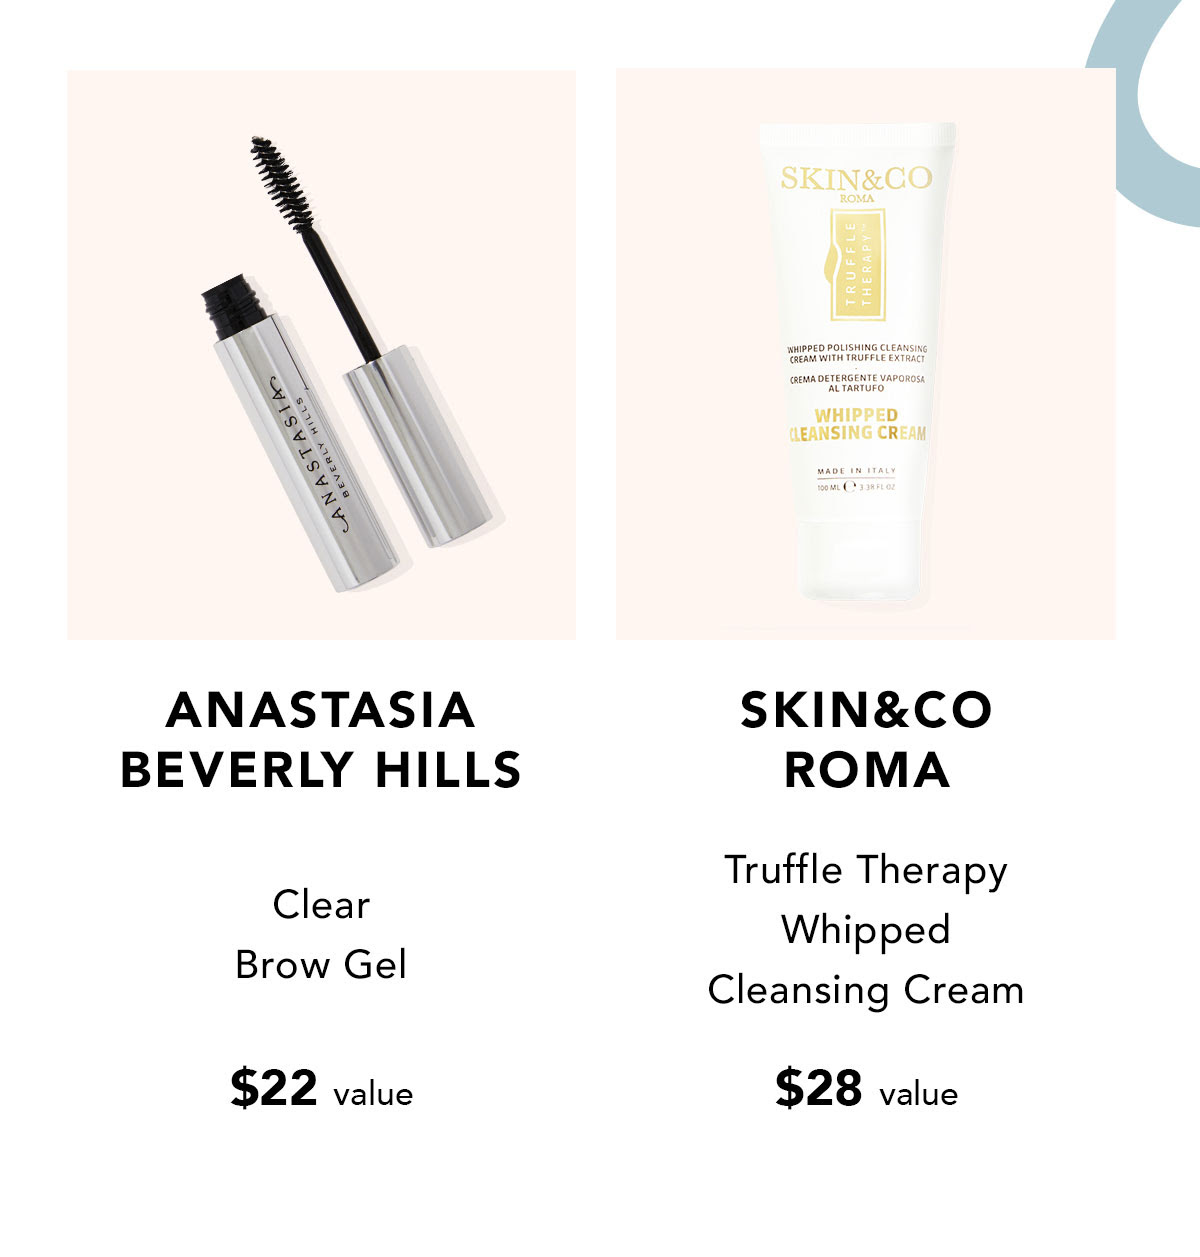 Anastasia Beverly Hills Clear Brow Gel $22 value | SKIN&CO Roma Truffle Therapy Whipped Cleansing Cream $28 value